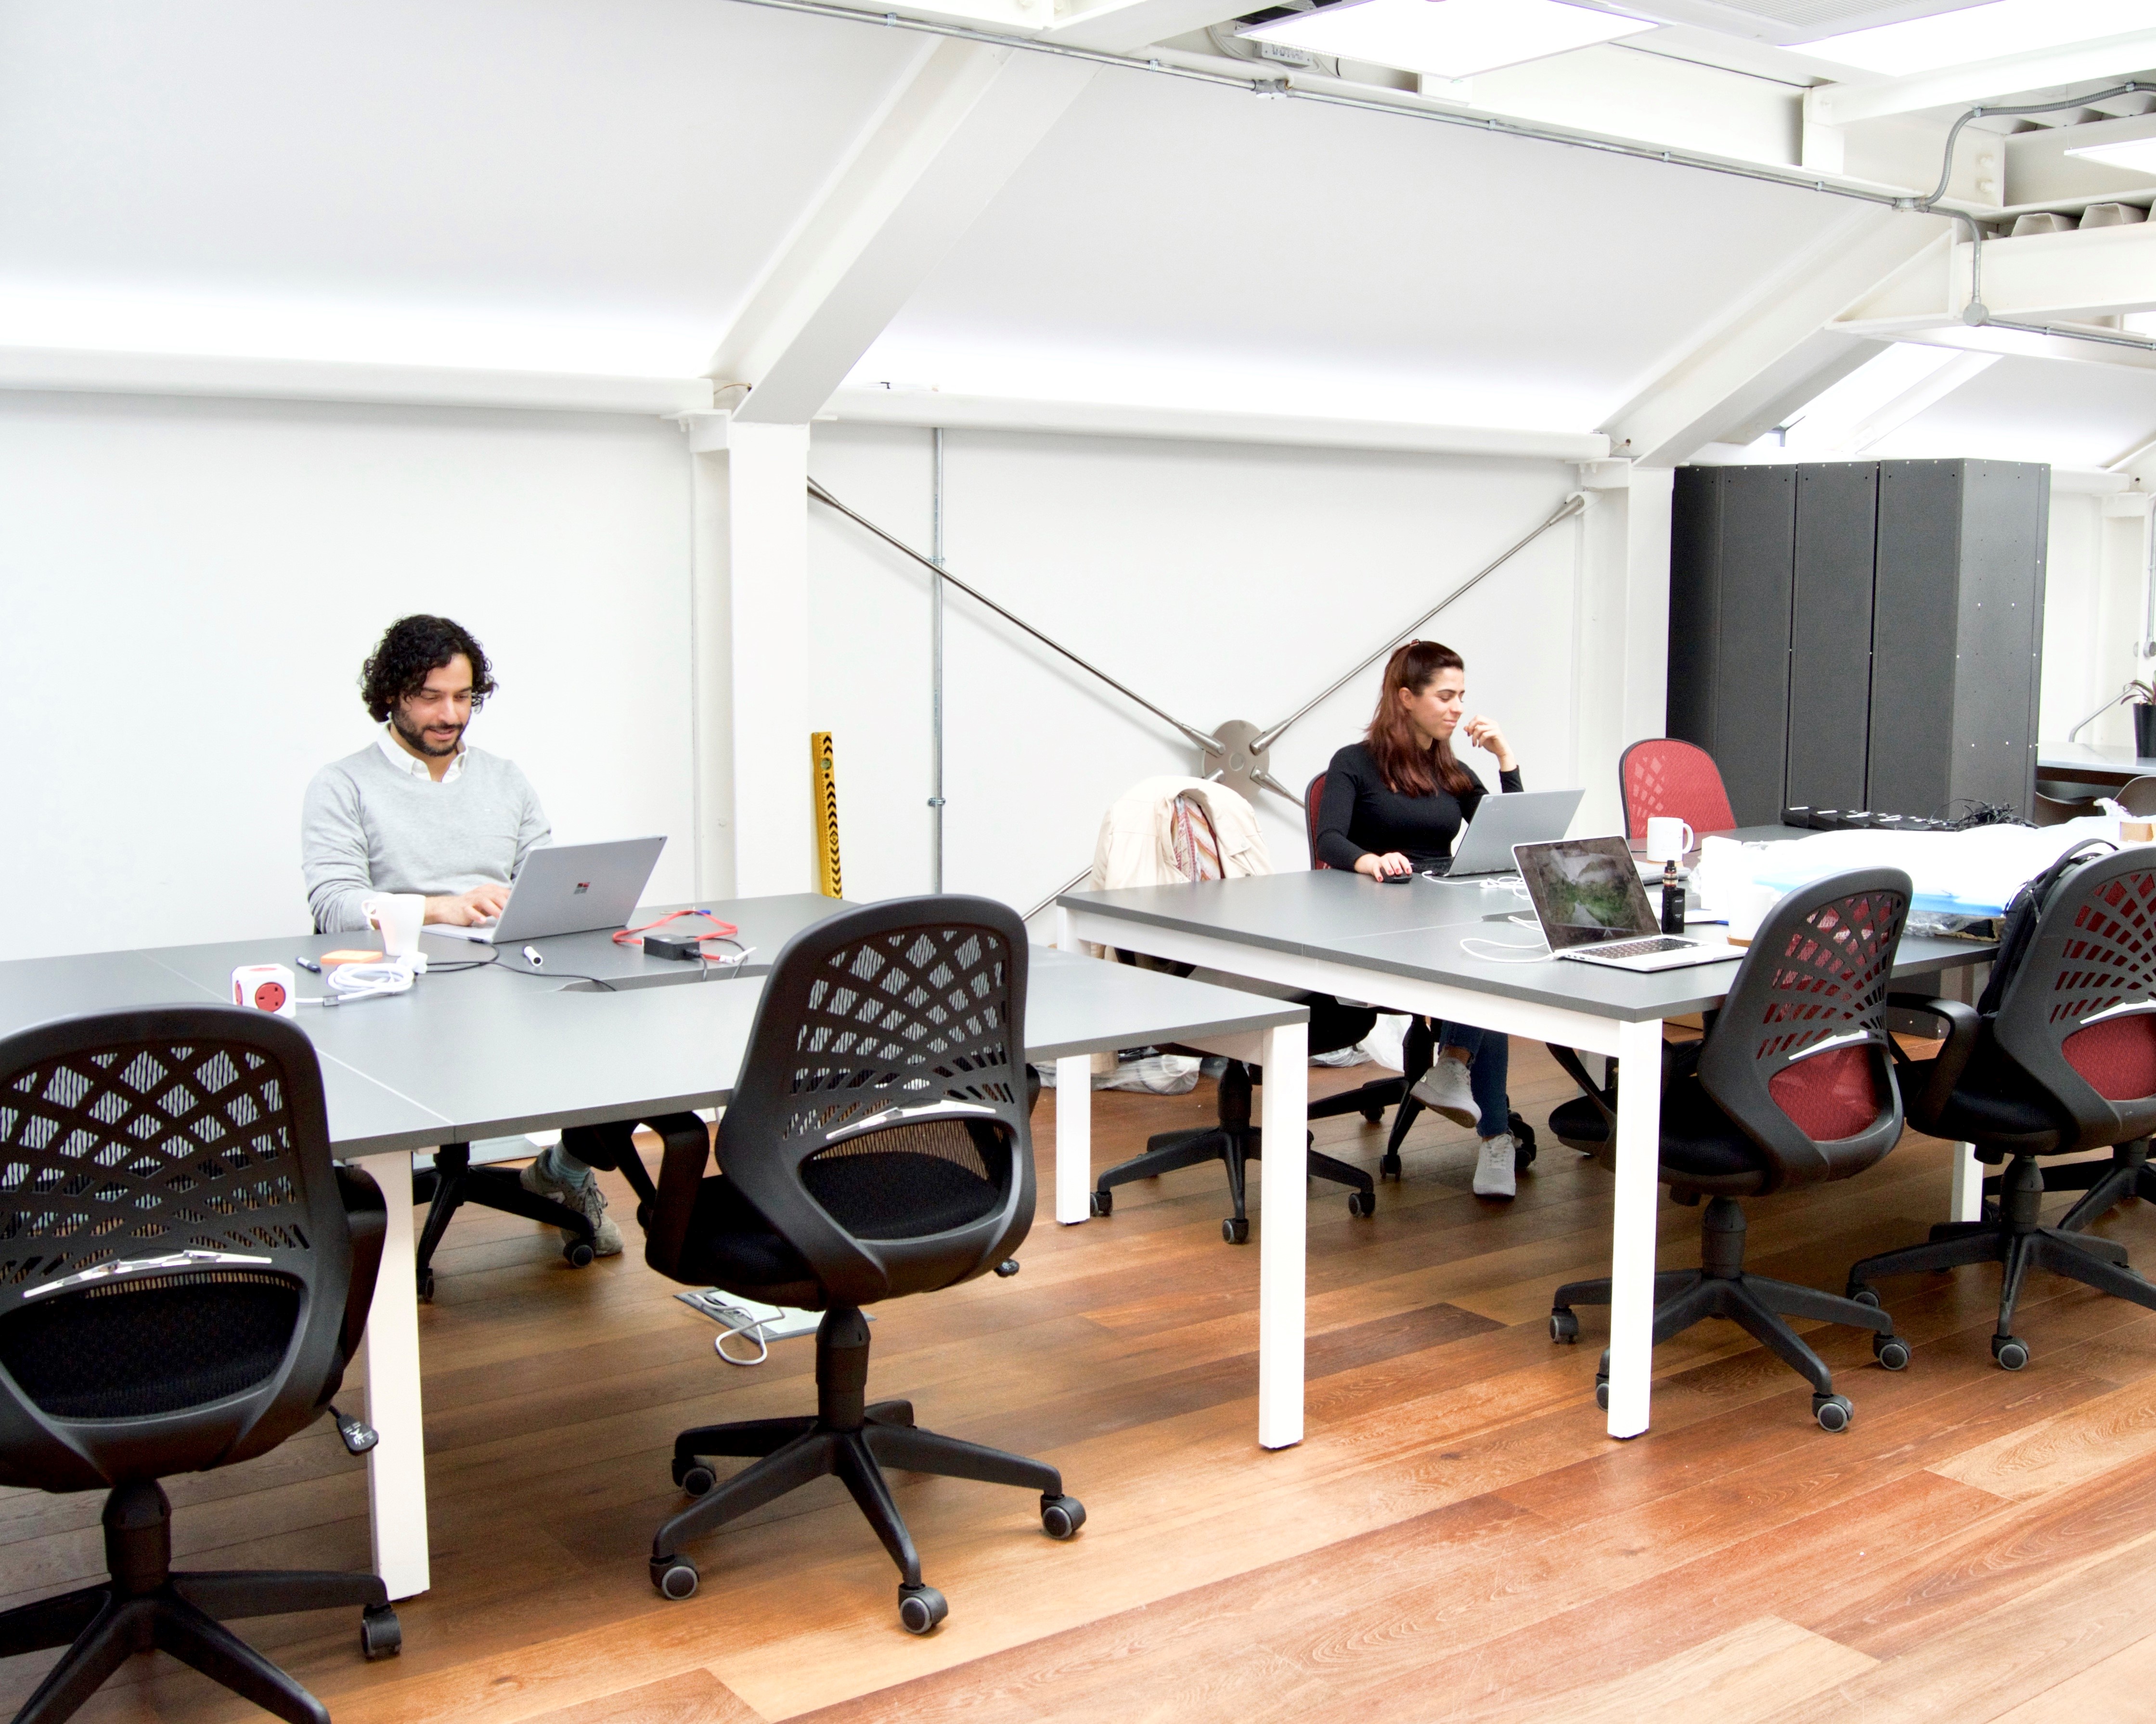 Coworking is about building a community that values innovation,  cross-pollination and friendship